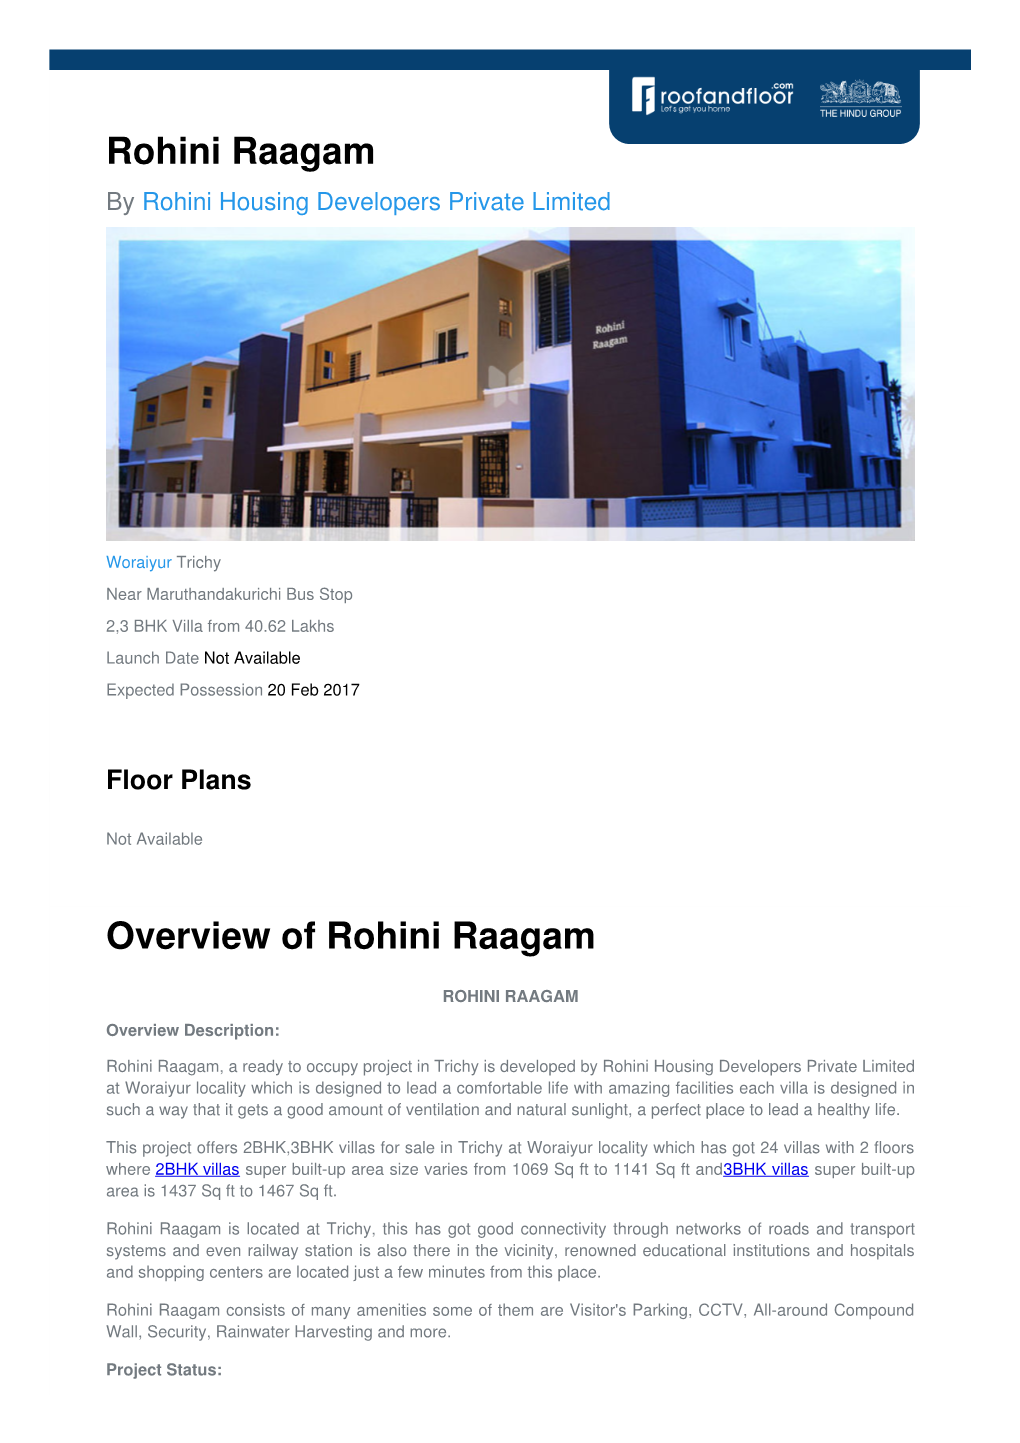 Rohini Raagam by Rohini Housing Developers Private Limited